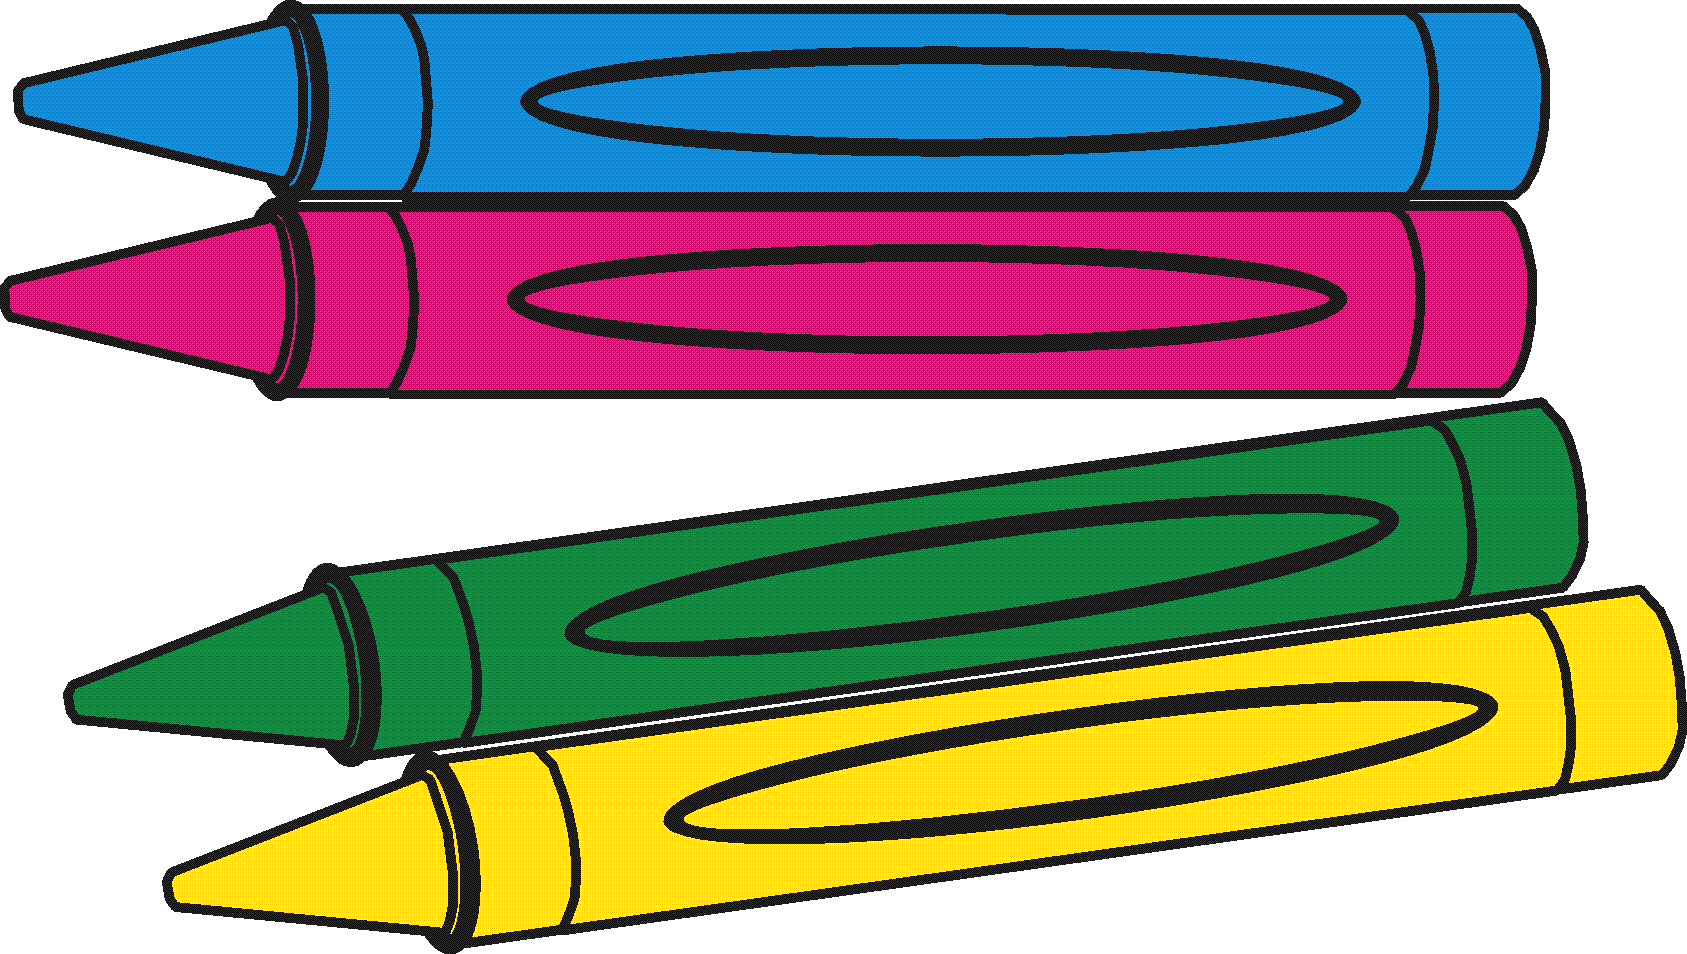 Crayons clipart black and white free clipart images